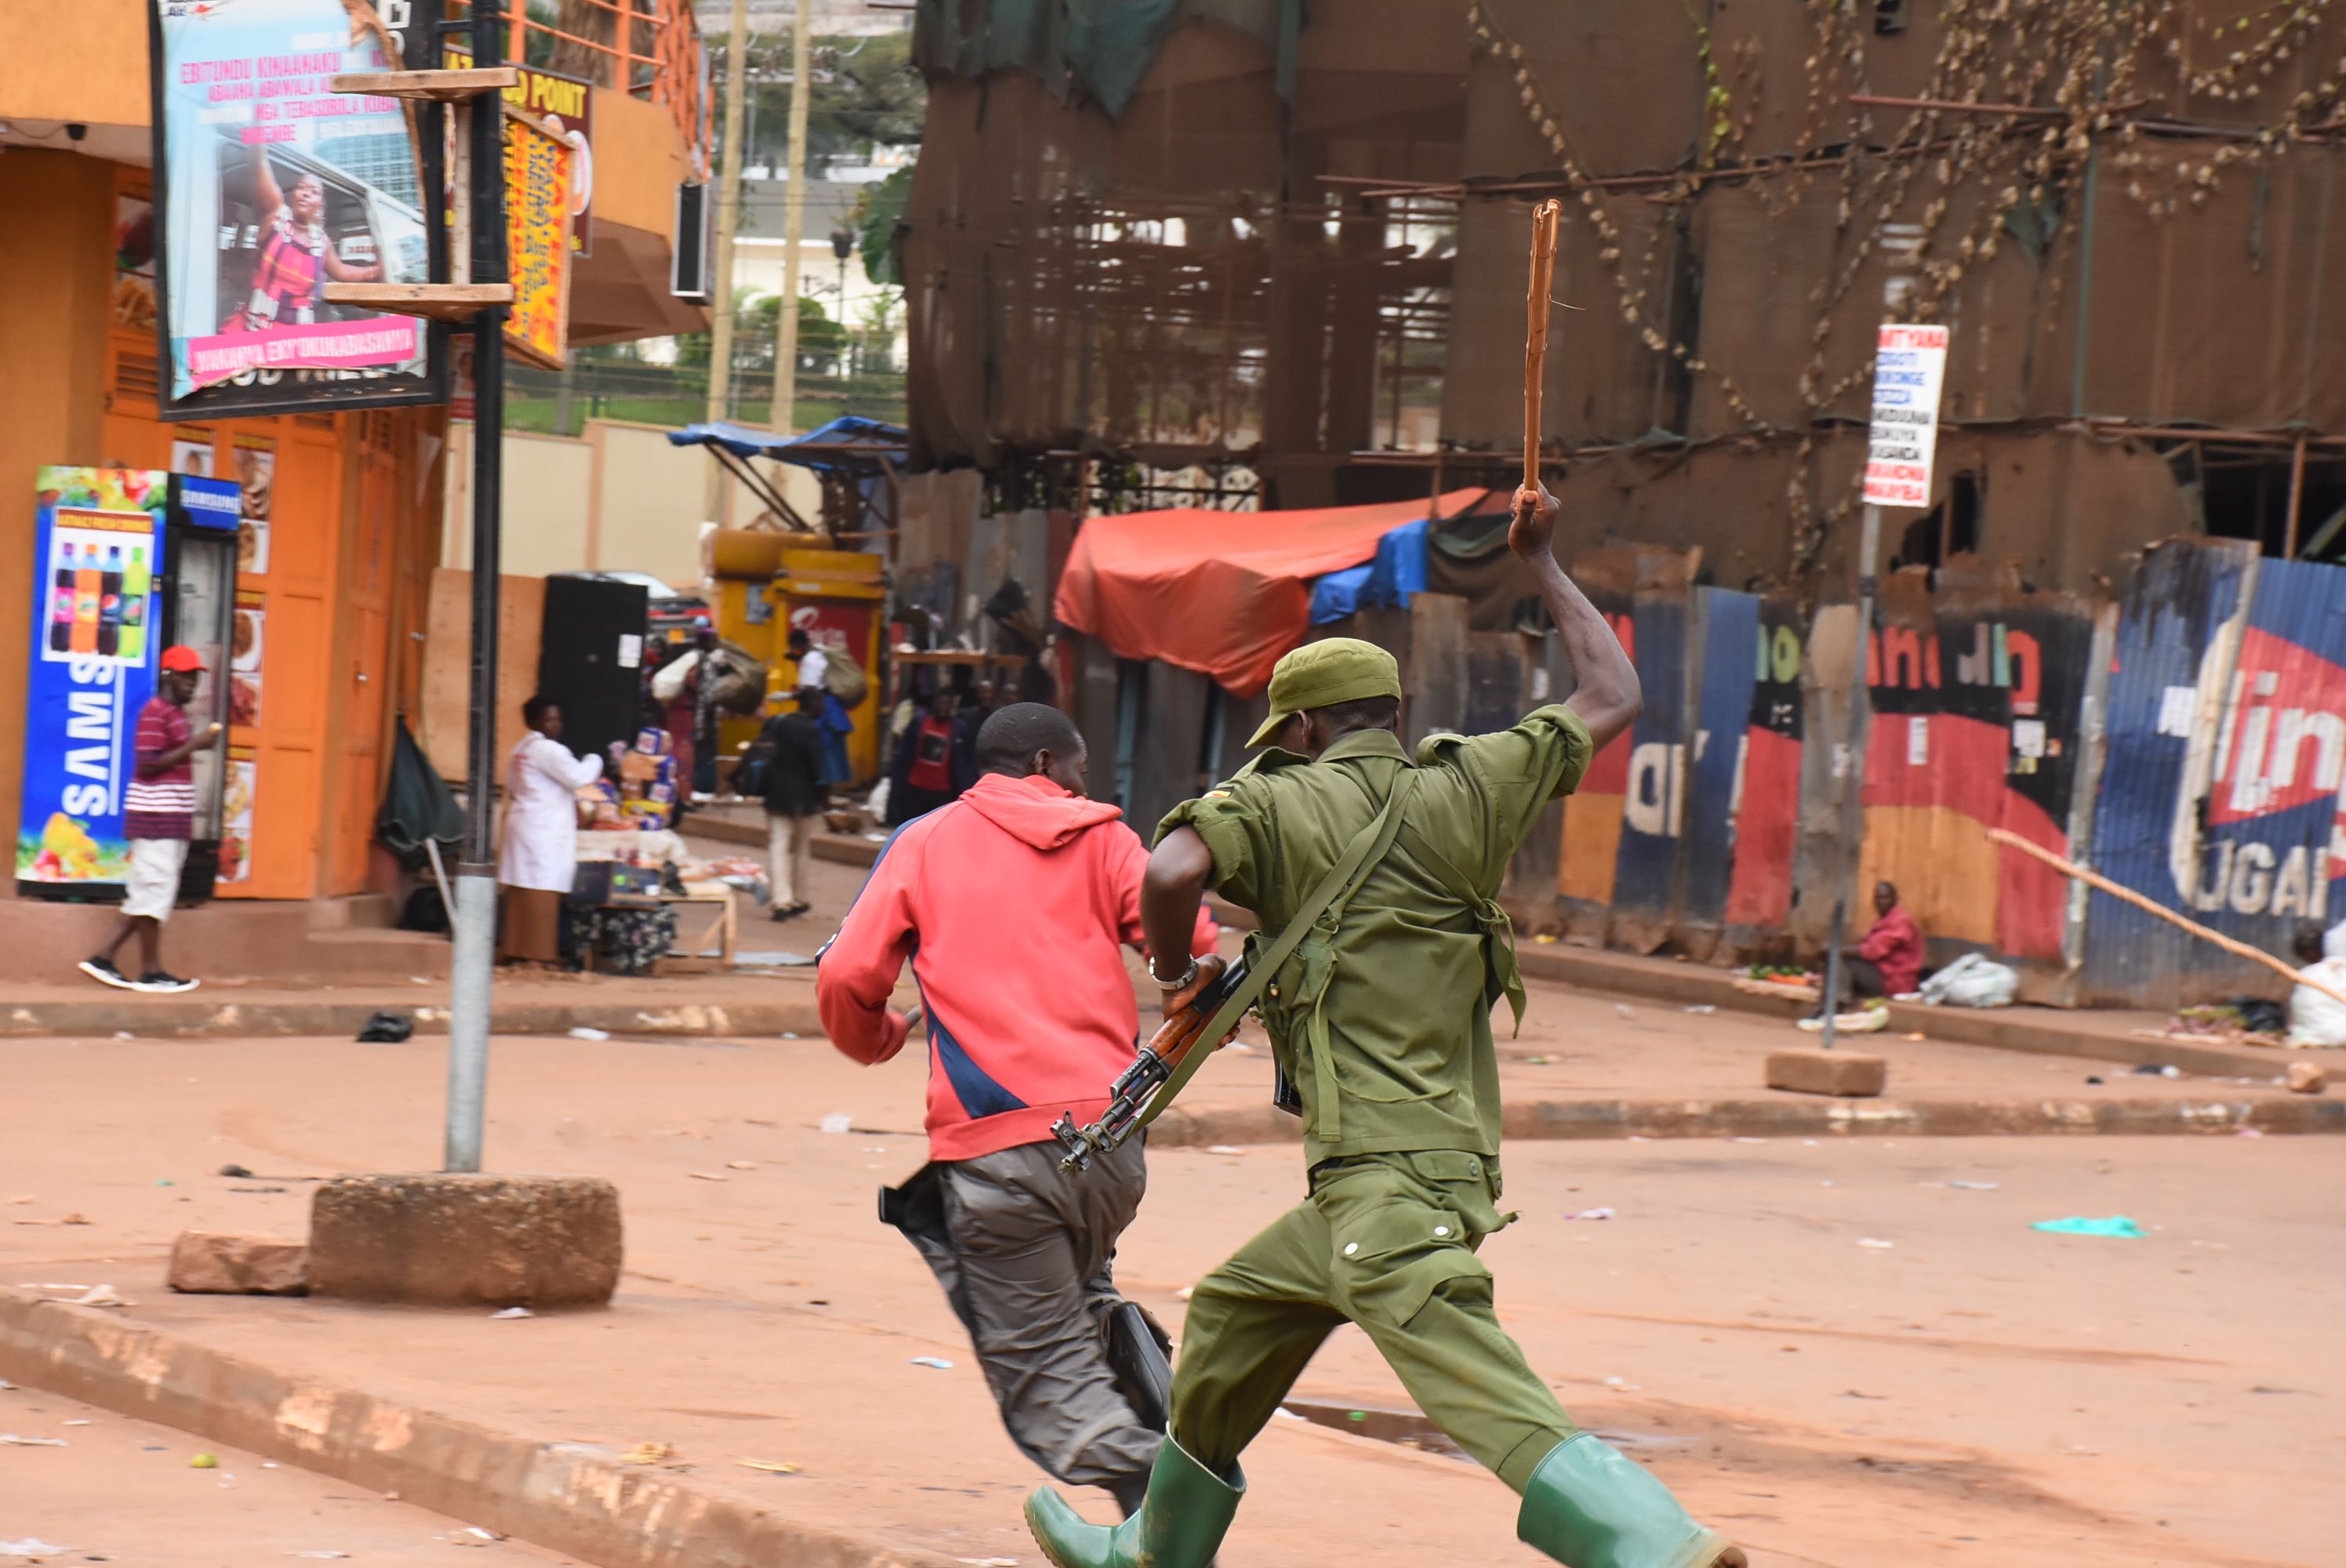 An LDU soldier beats a person during implementation of coronavirus restrictions in Kampala in March. Image by Alex Esagala. Uganda, 2020.